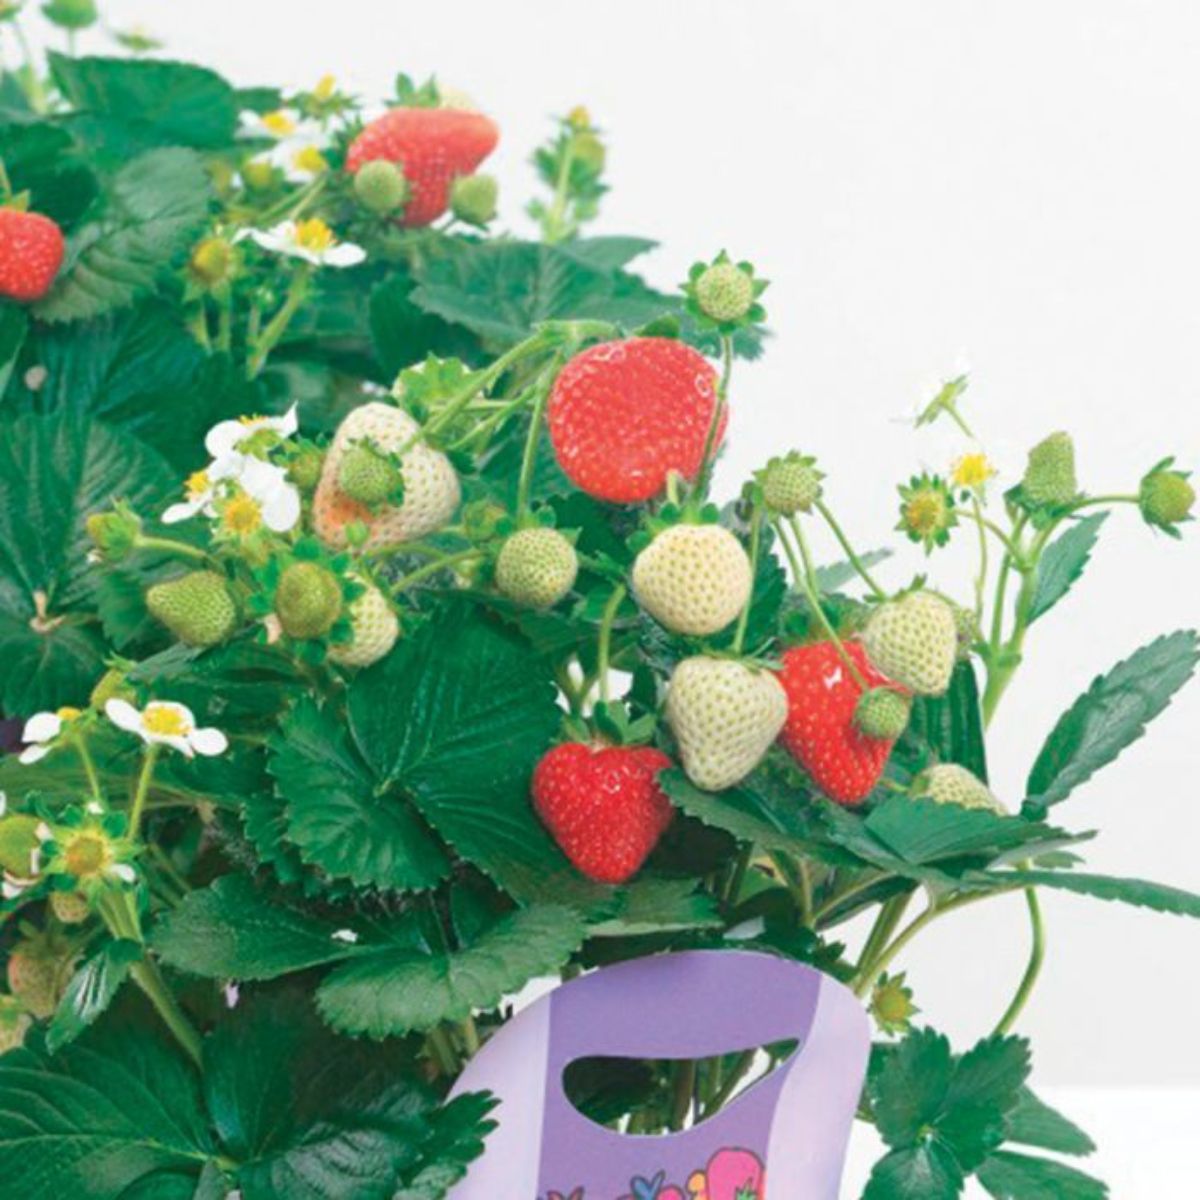 Delizz strawberry plant with ripe and unripe fruits and white flwoers.